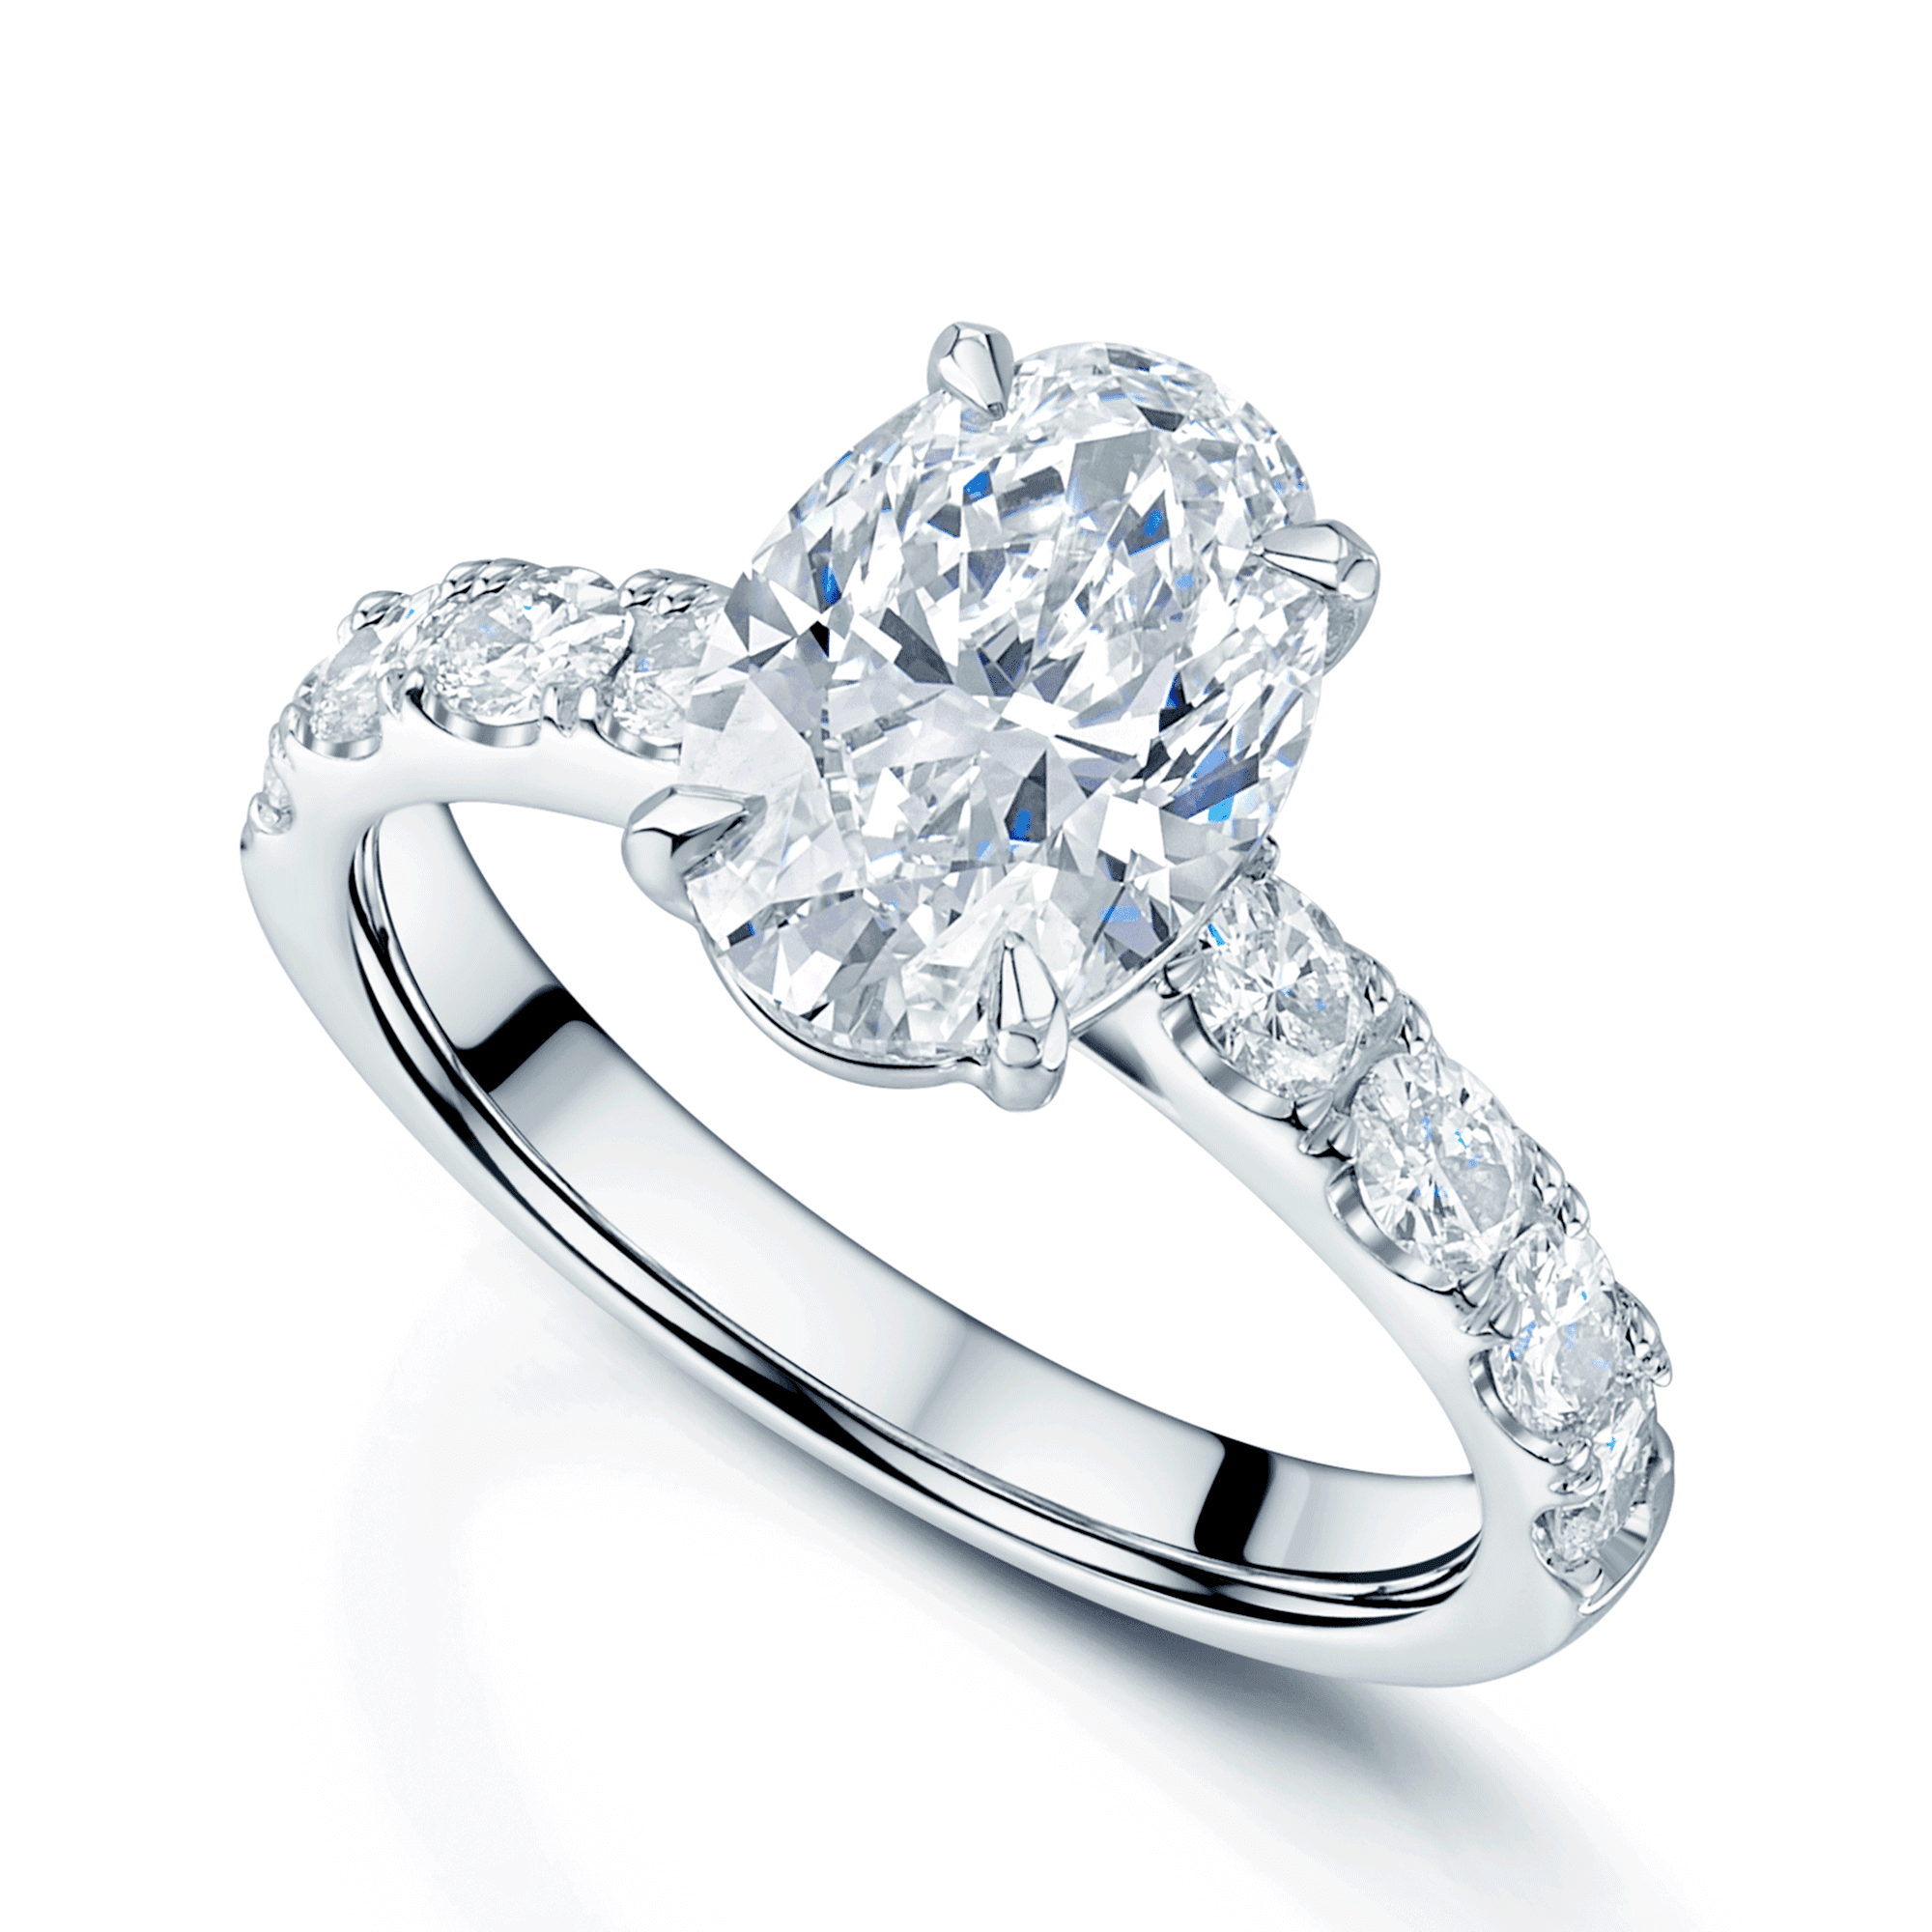 Platinum GIA Certificated 2.51 Carat Oval Cut Diamond Single Stone Ring With Oval Cut Diamond Shoulders